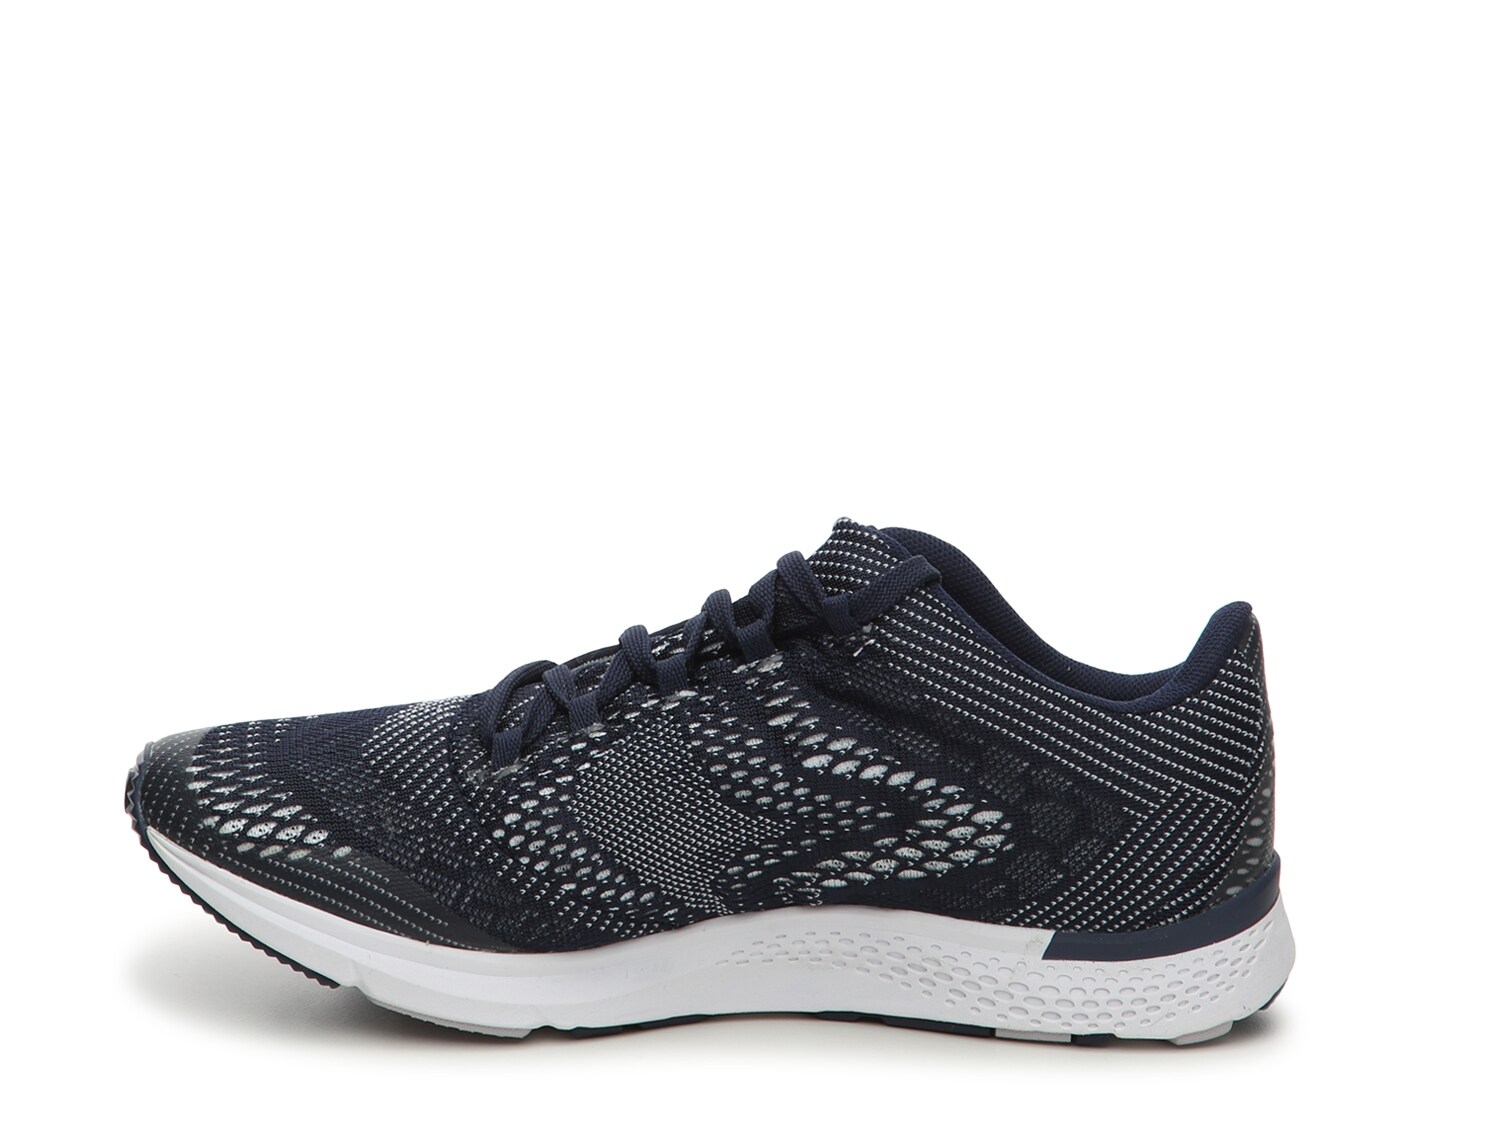 new balance fuelcore agility